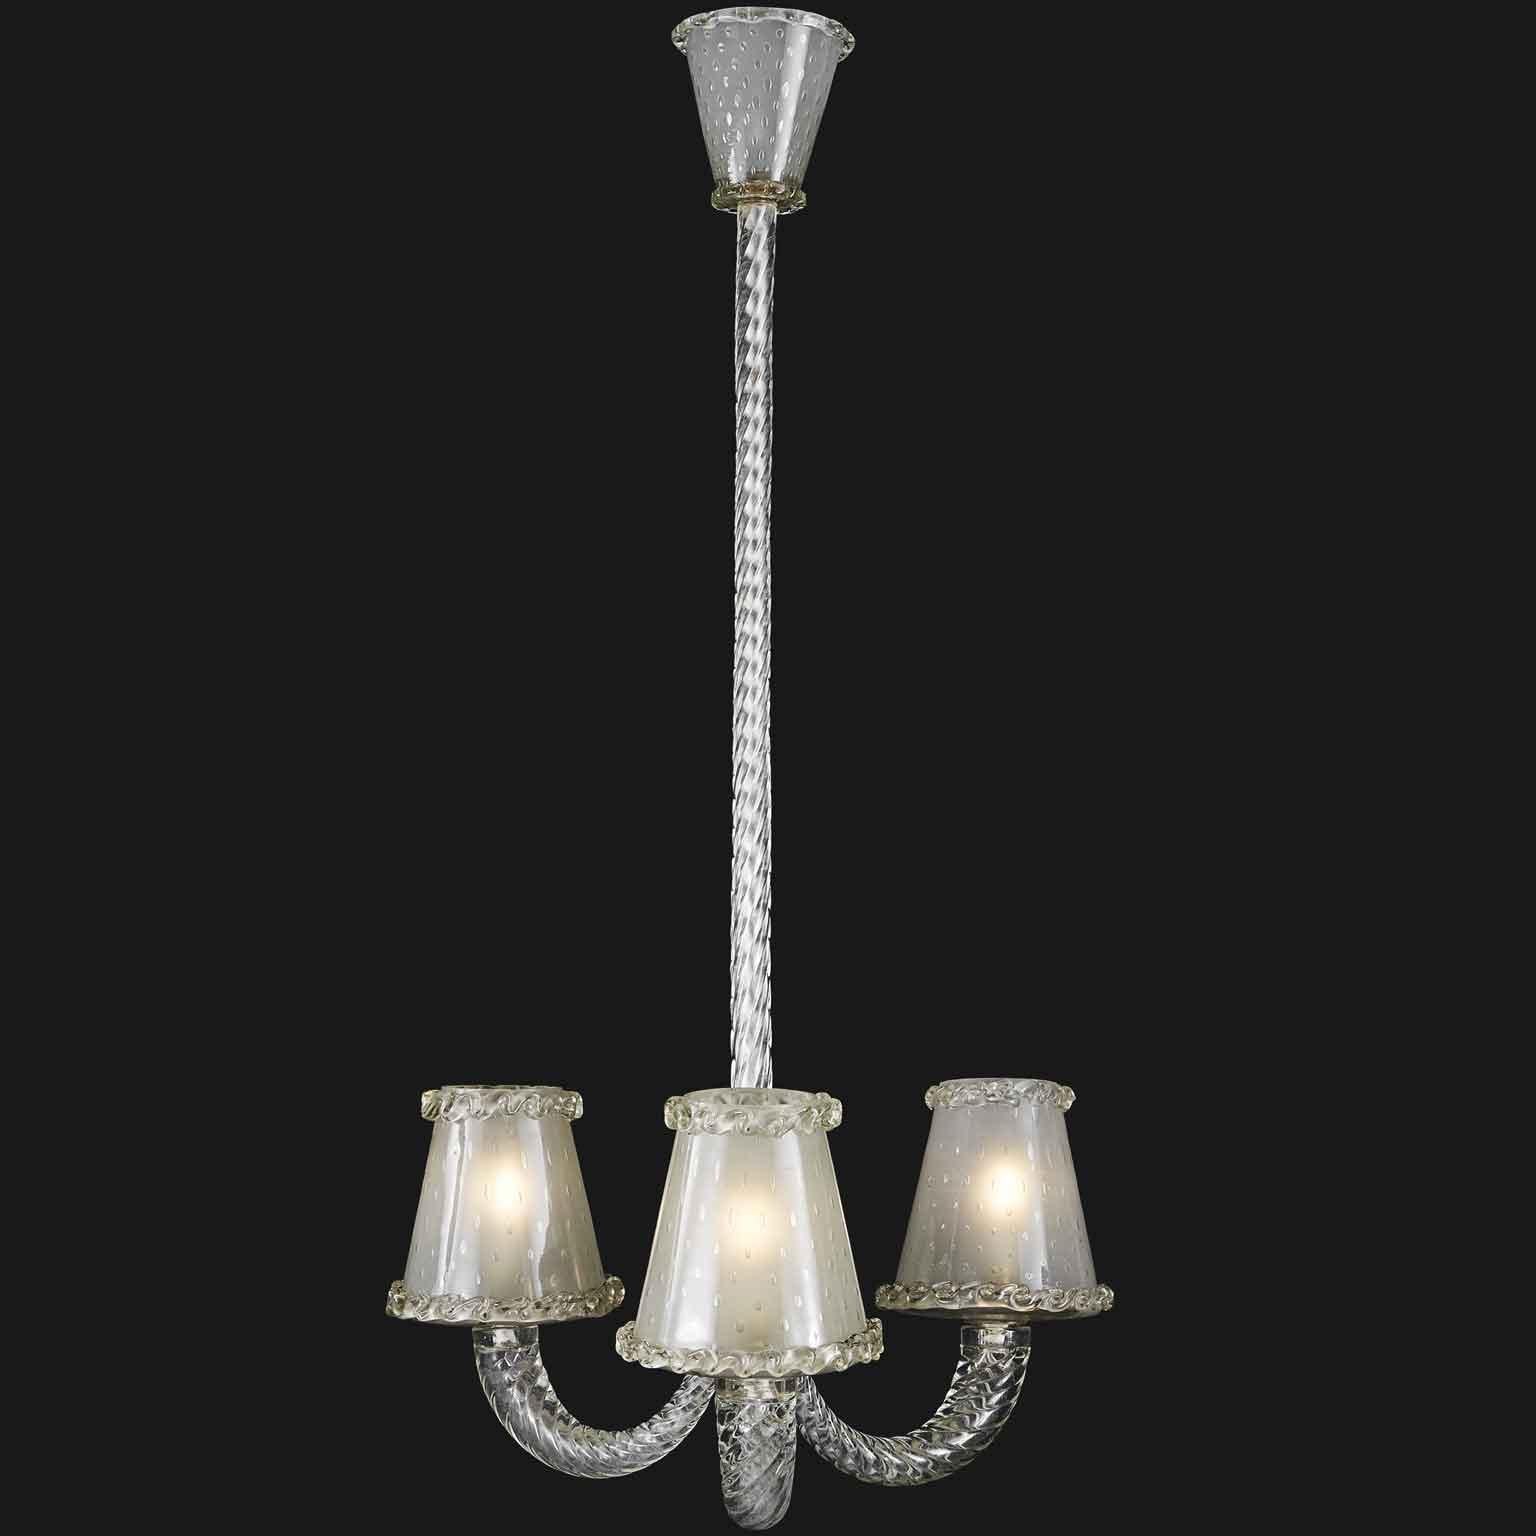 Hand-Crafted 20th Century Italian Barovier Toso Venetian Murano Glass Art Deco Chandelier For Sale